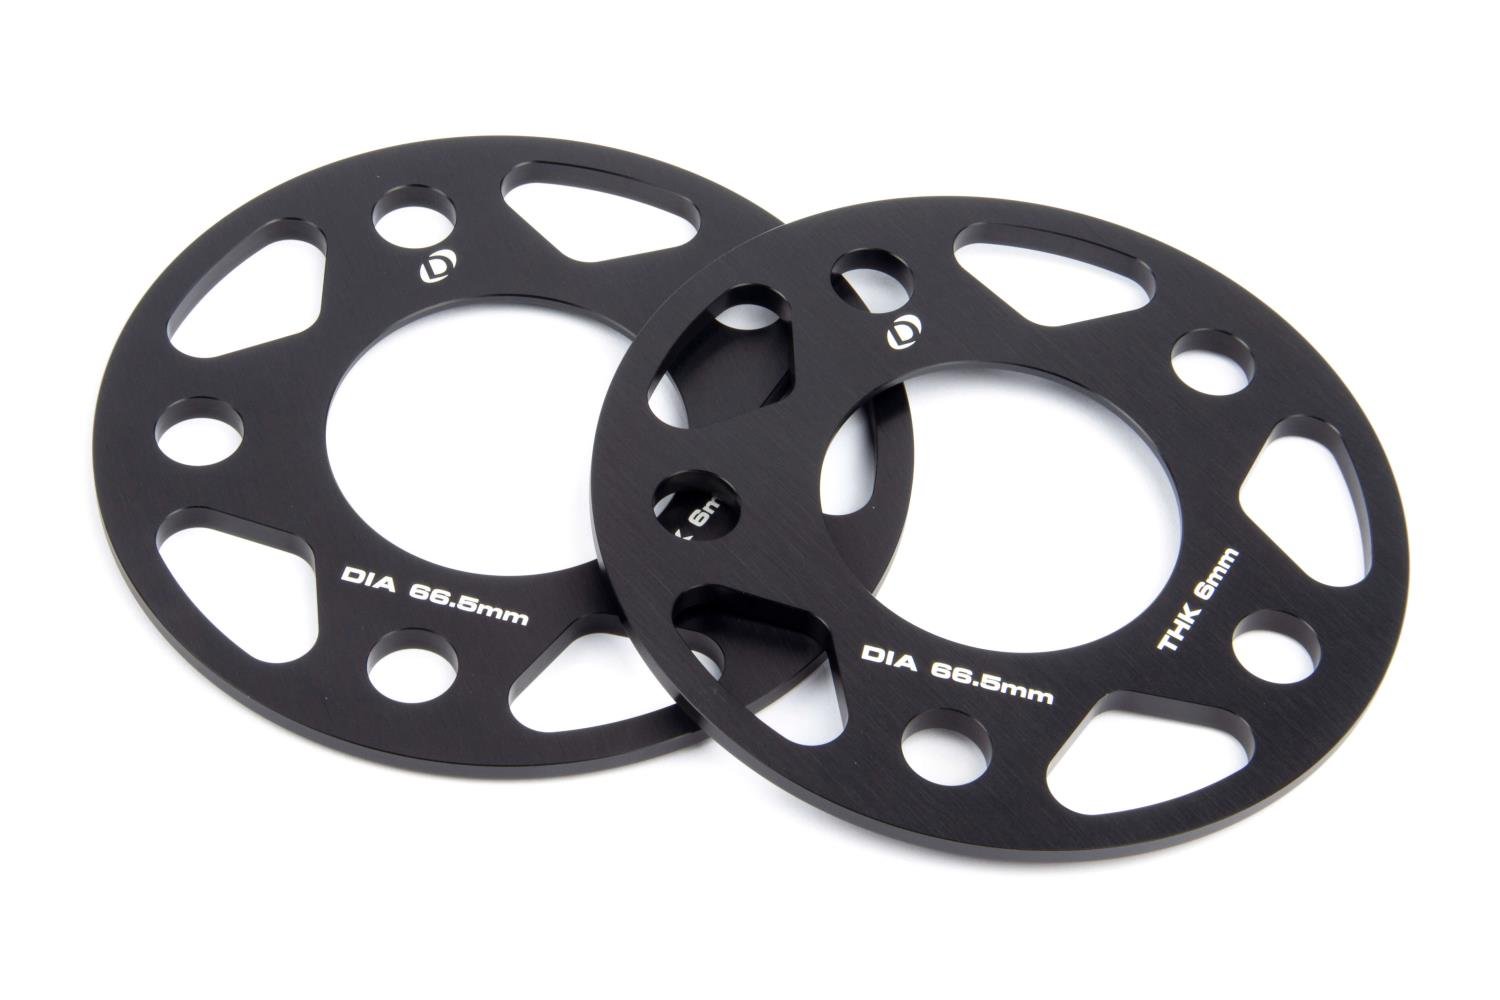 Machined Aluminum Wheel Spacers [6 mm Thick] for